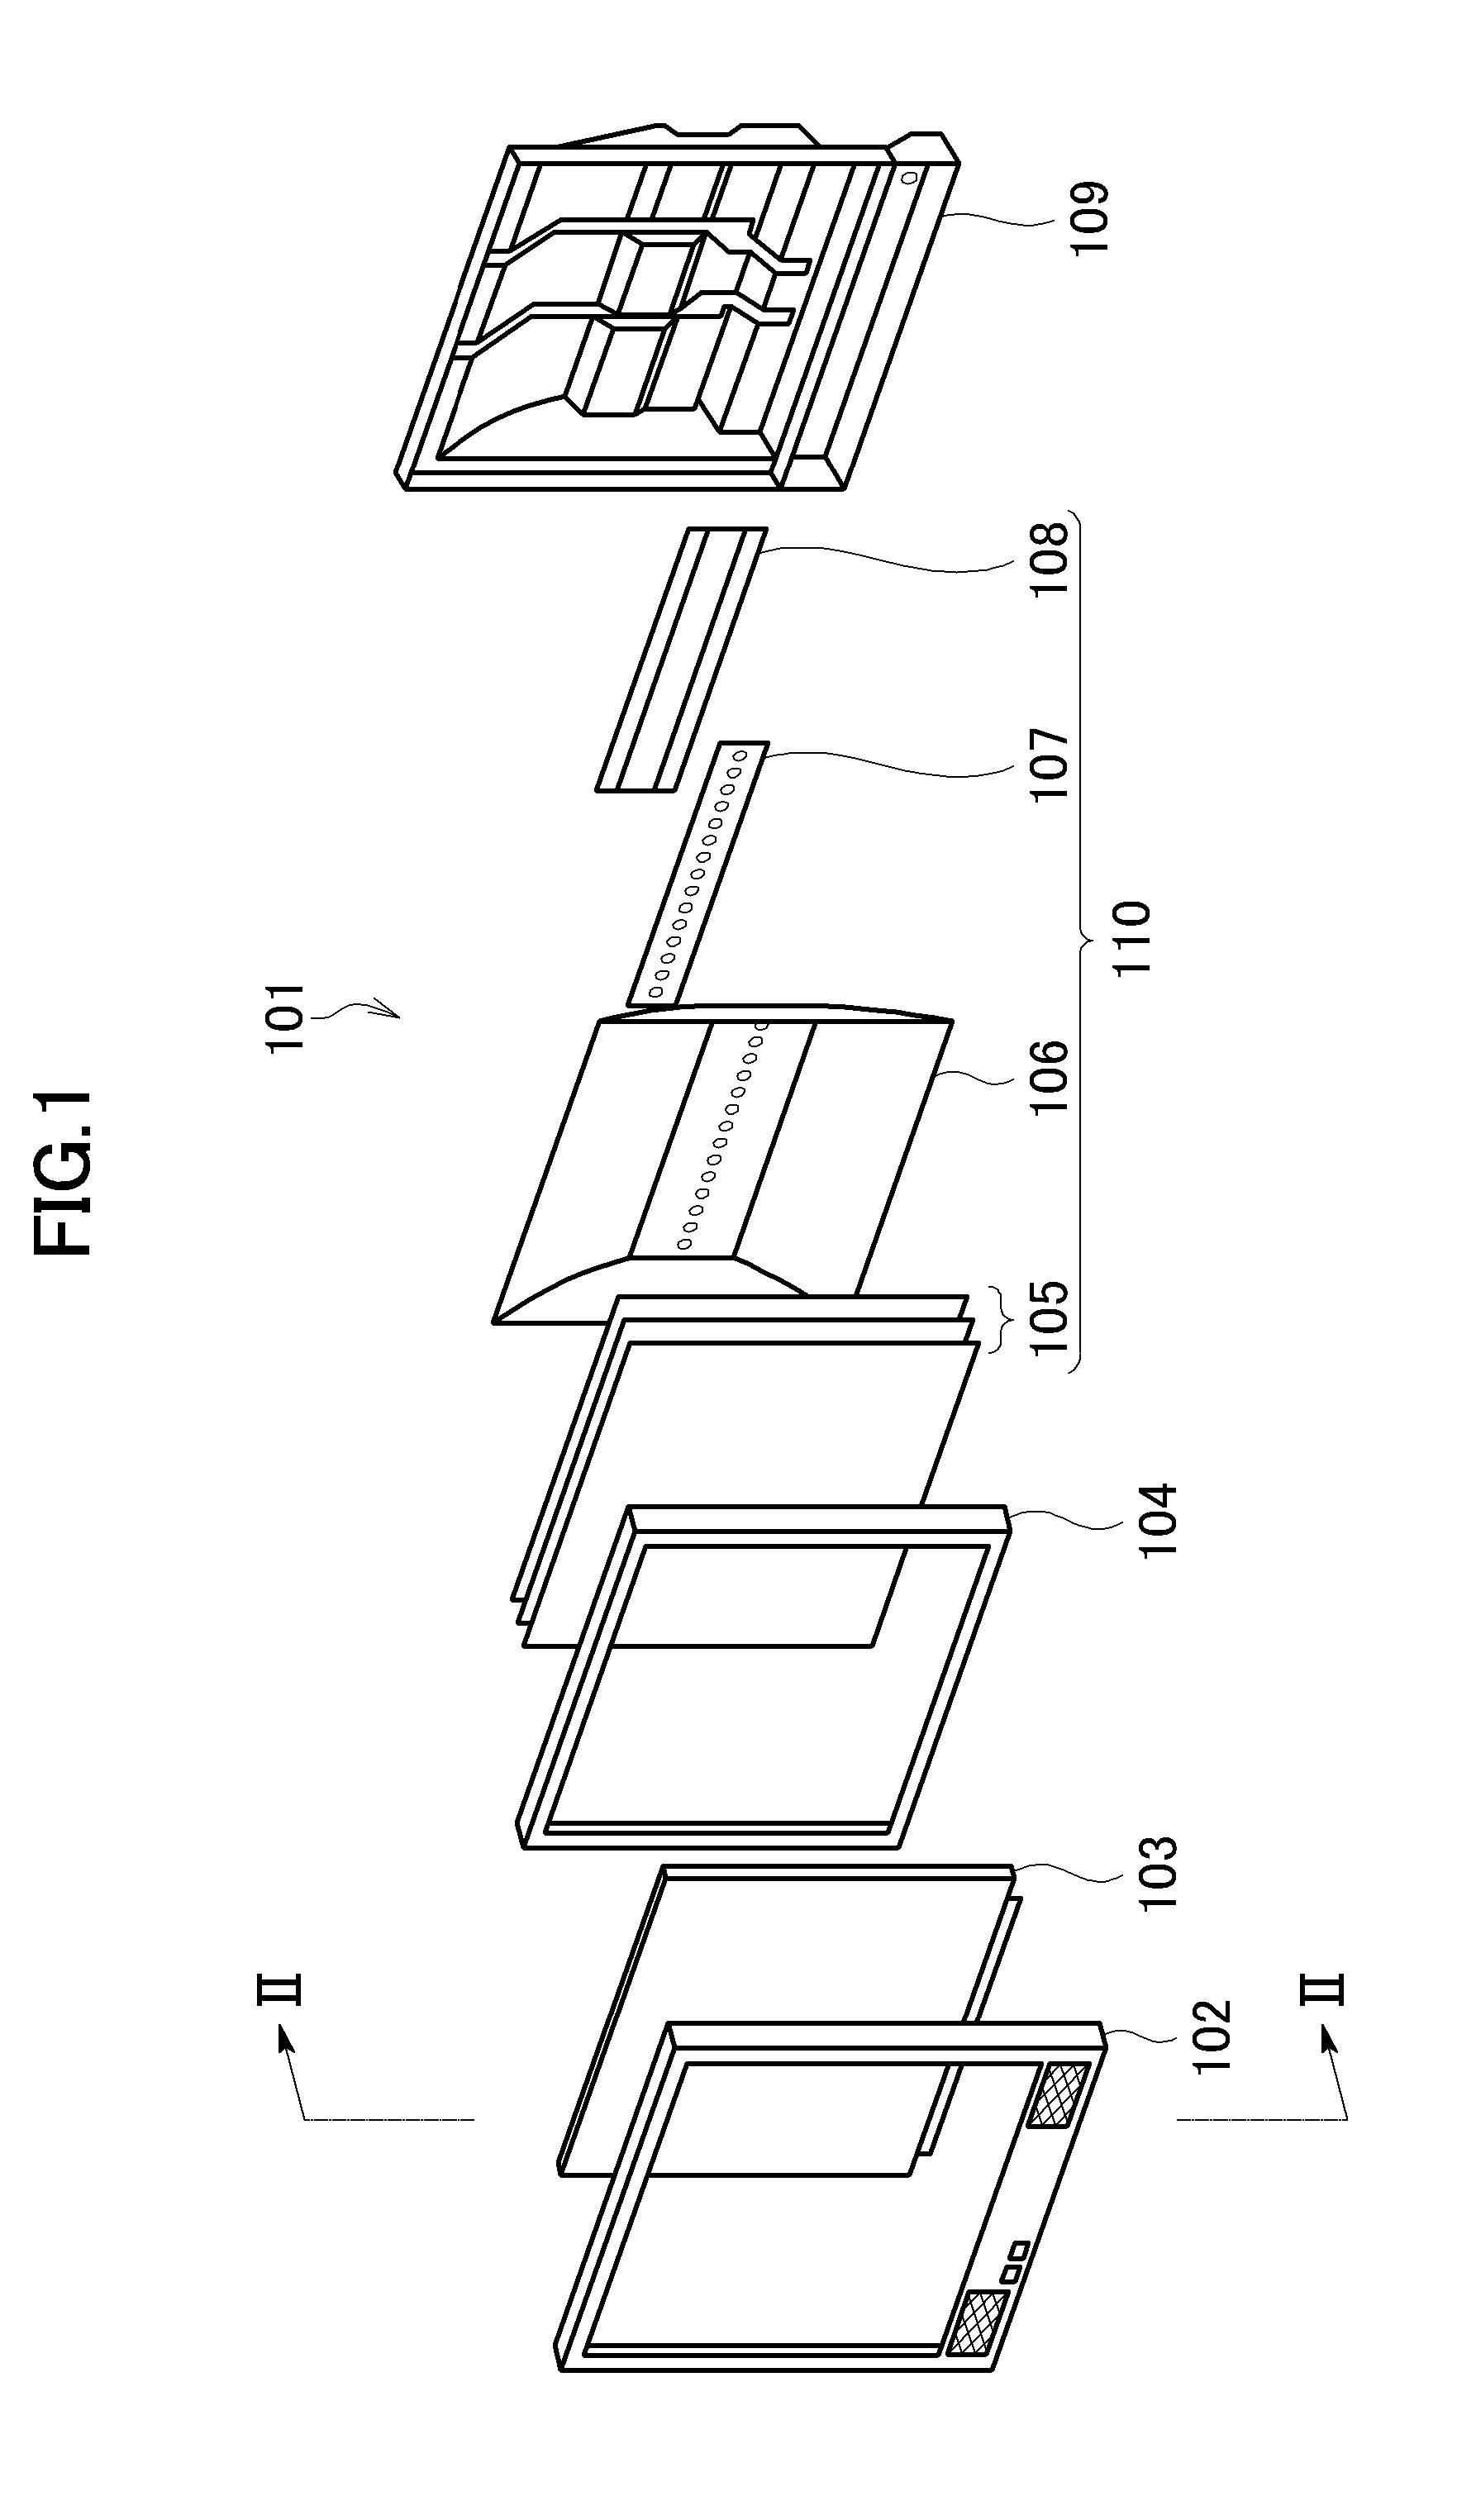 Liquid crystal display device and television receiver